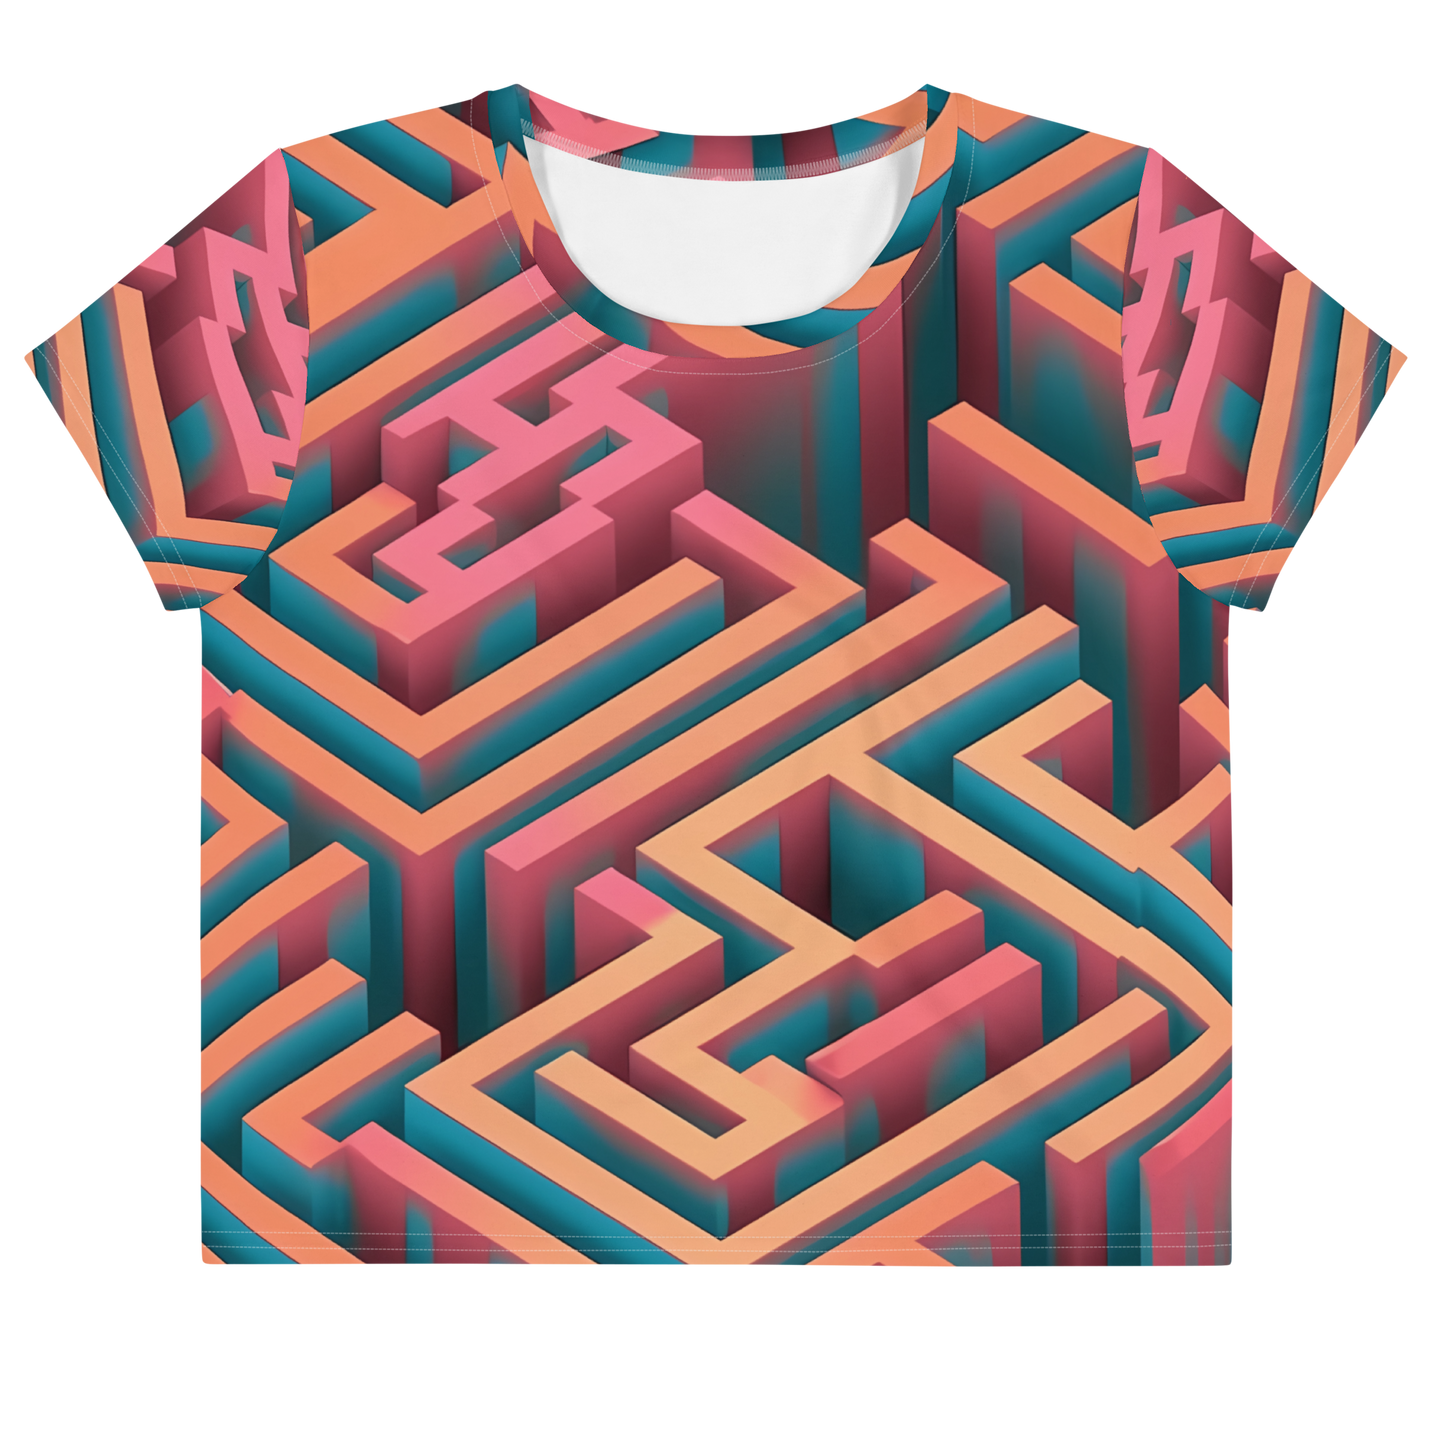 3D Maze Illusion | 3D Patterns | All-Over Print Crop Tee - #1